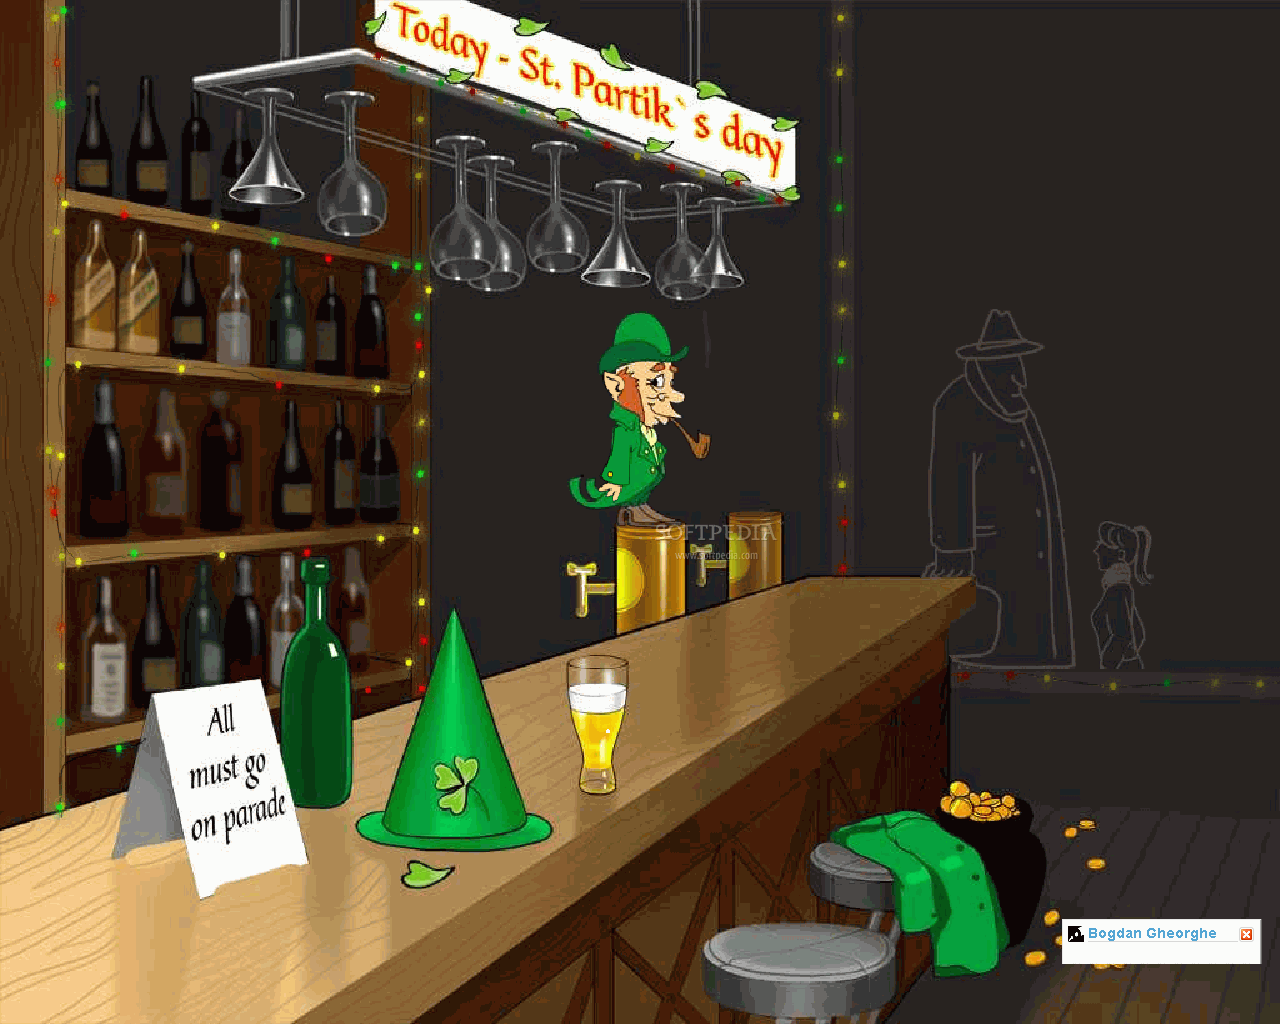 Irish Pub Animated Wallpaper This Is The Image Displayed By